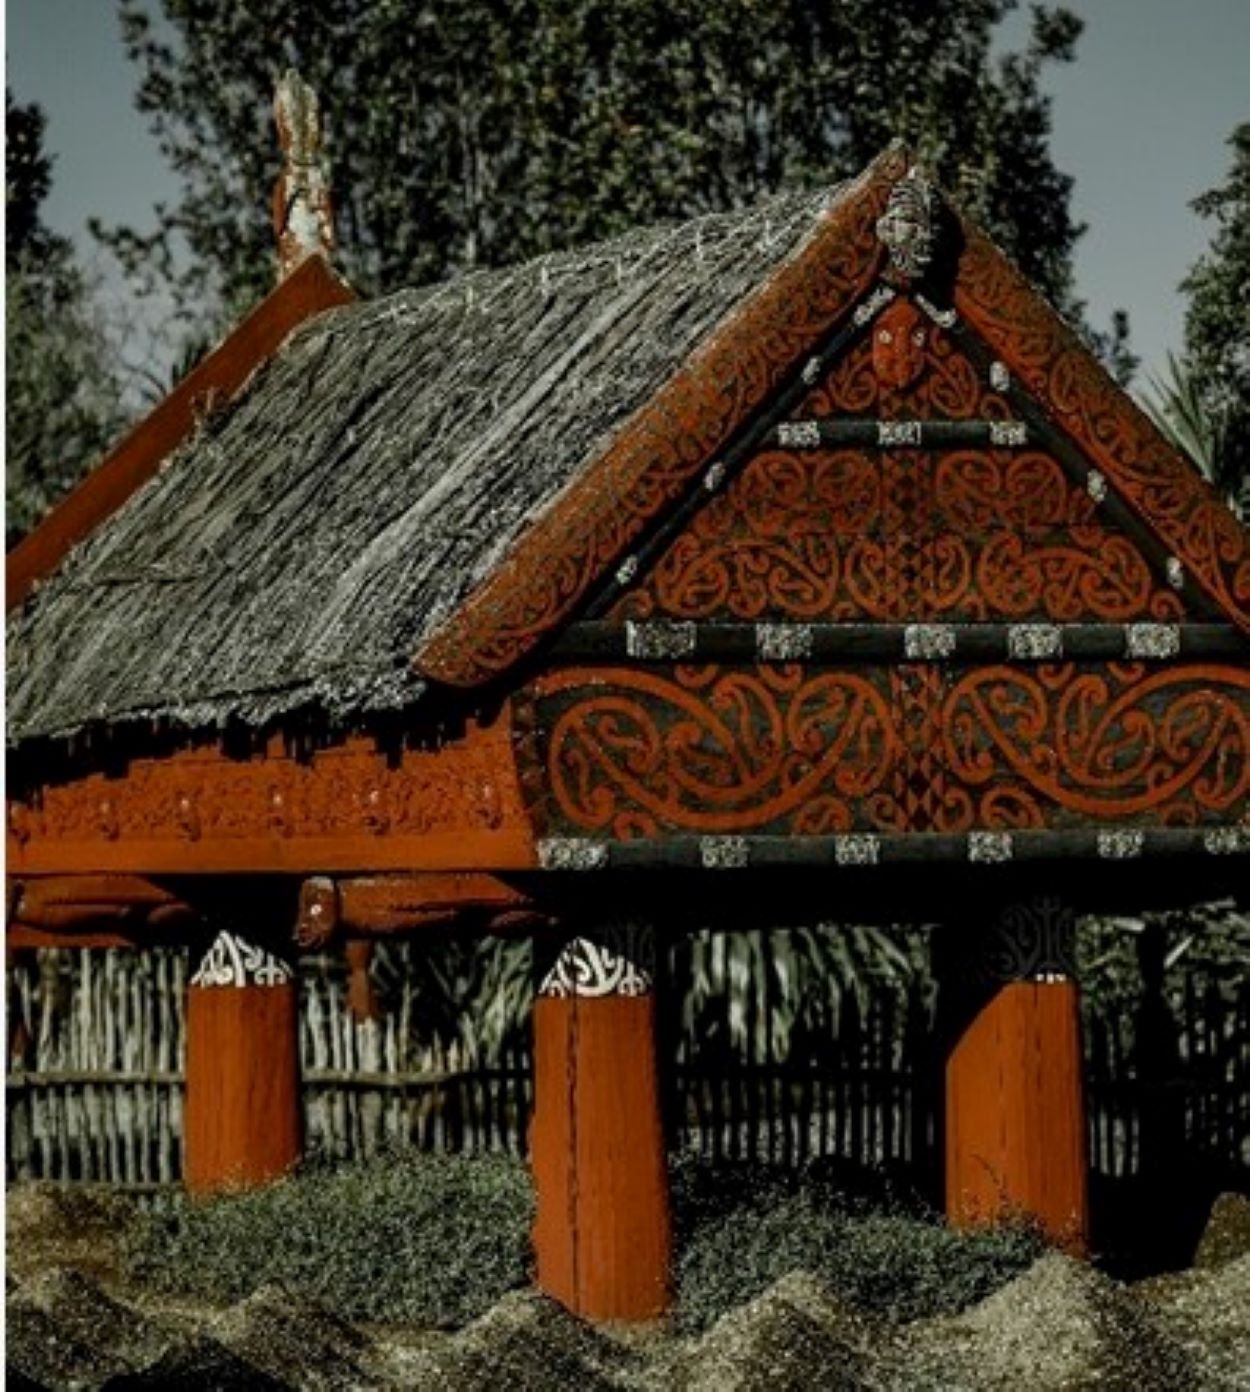 Carved buildings were used as ritual centers